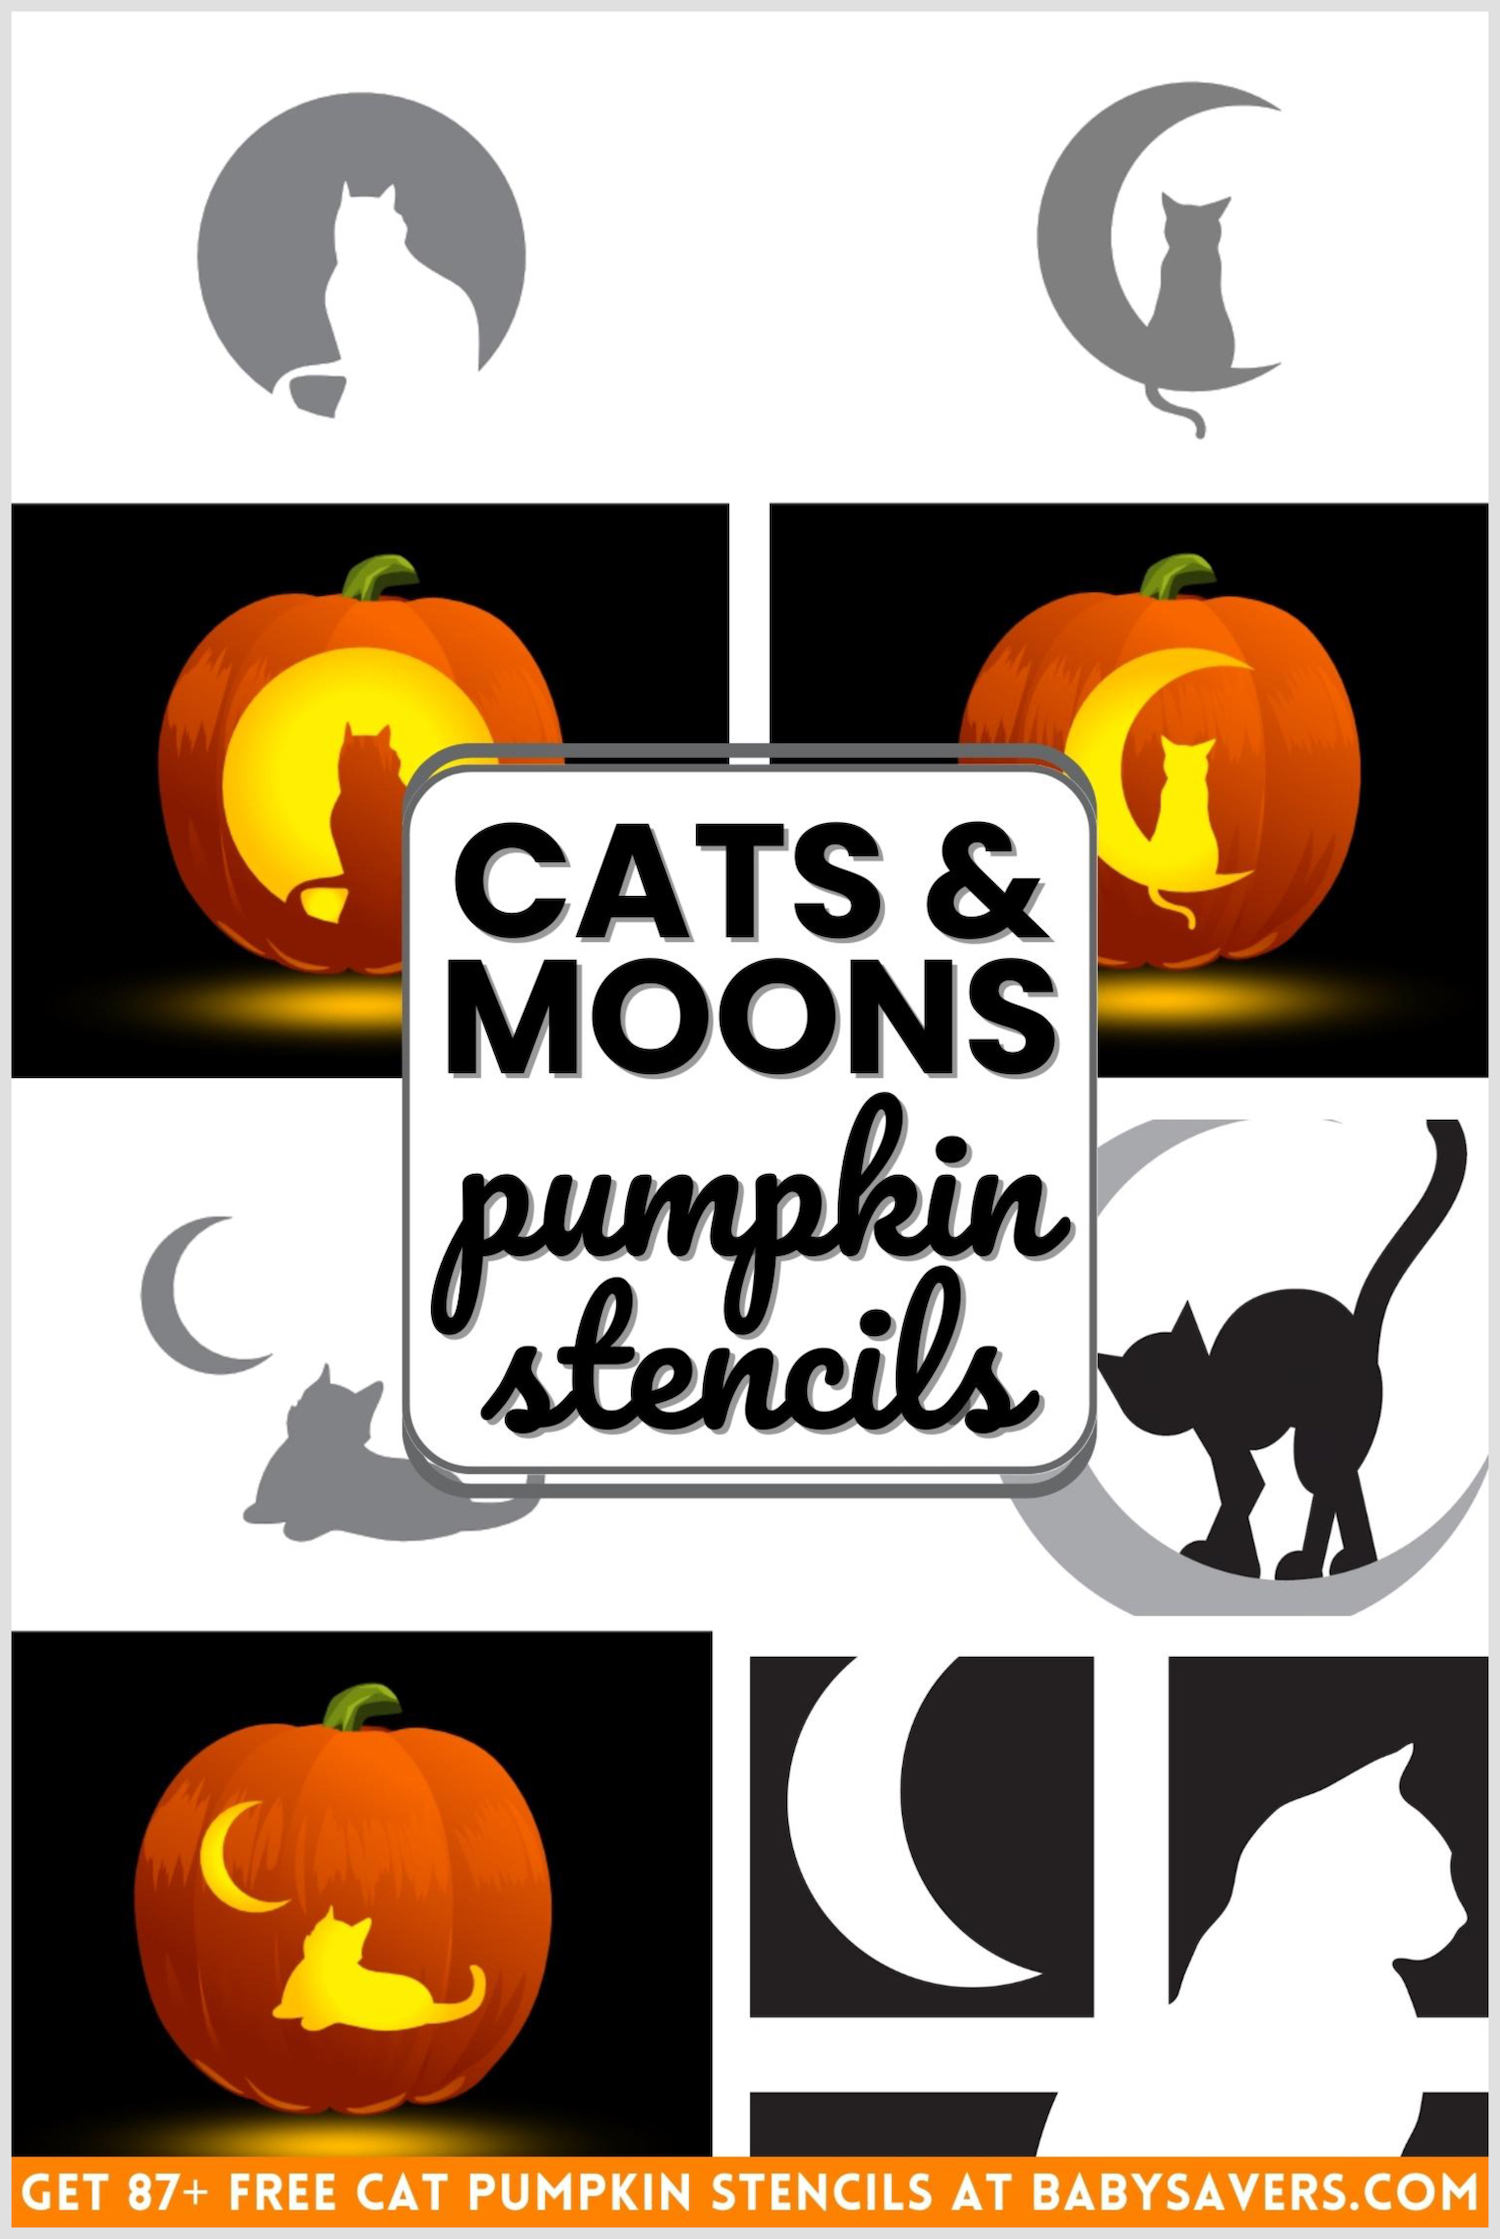 collage of cat pumpkin stencils all with moons. Text overlay reading Cats & Moons pumpkin stencils.